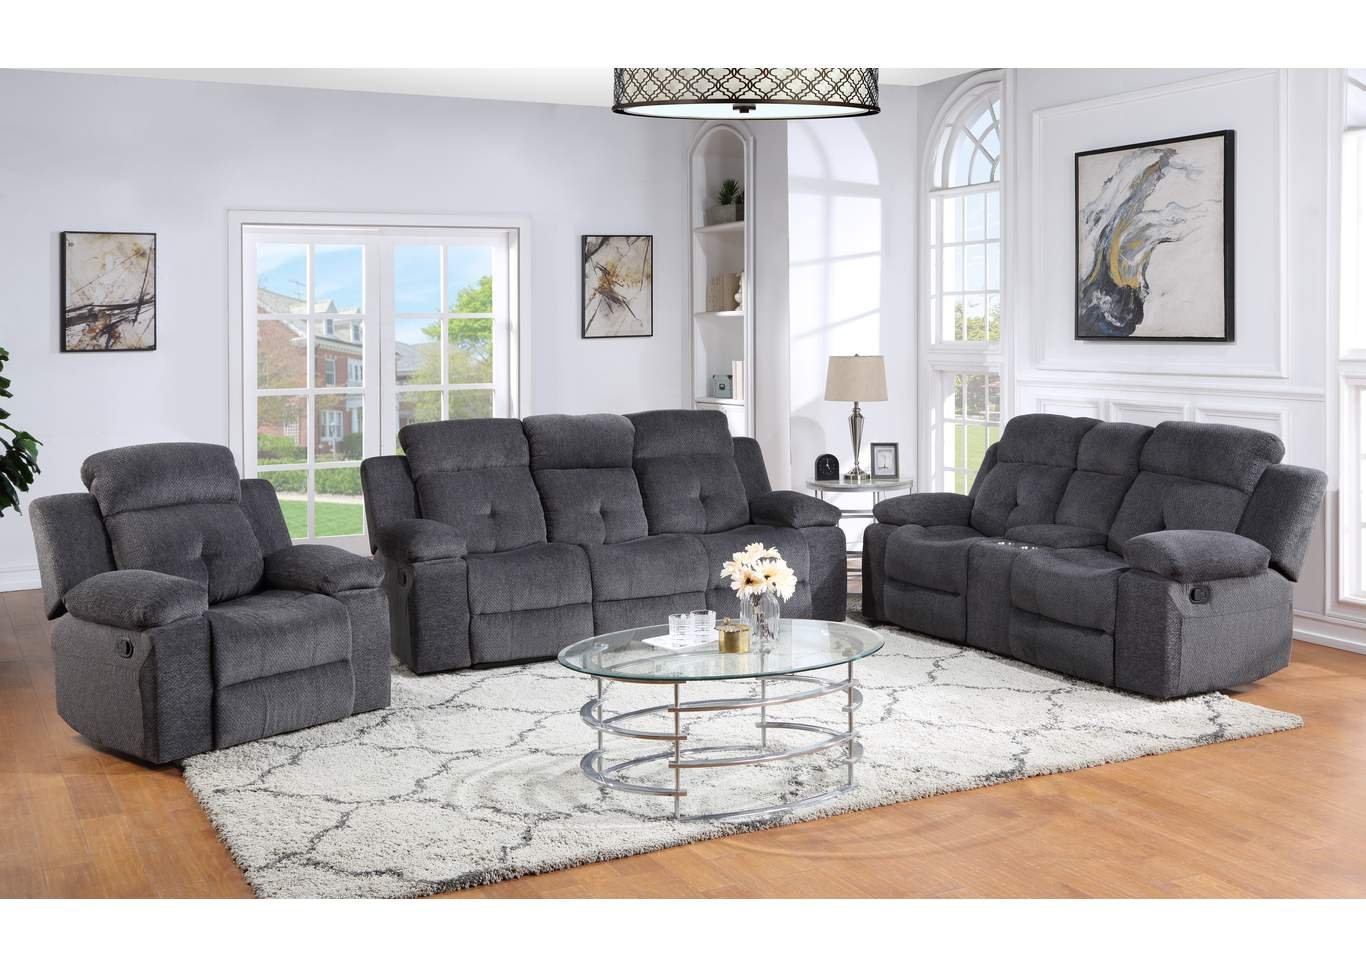 The Concept Trading LLC looking for living room furniture